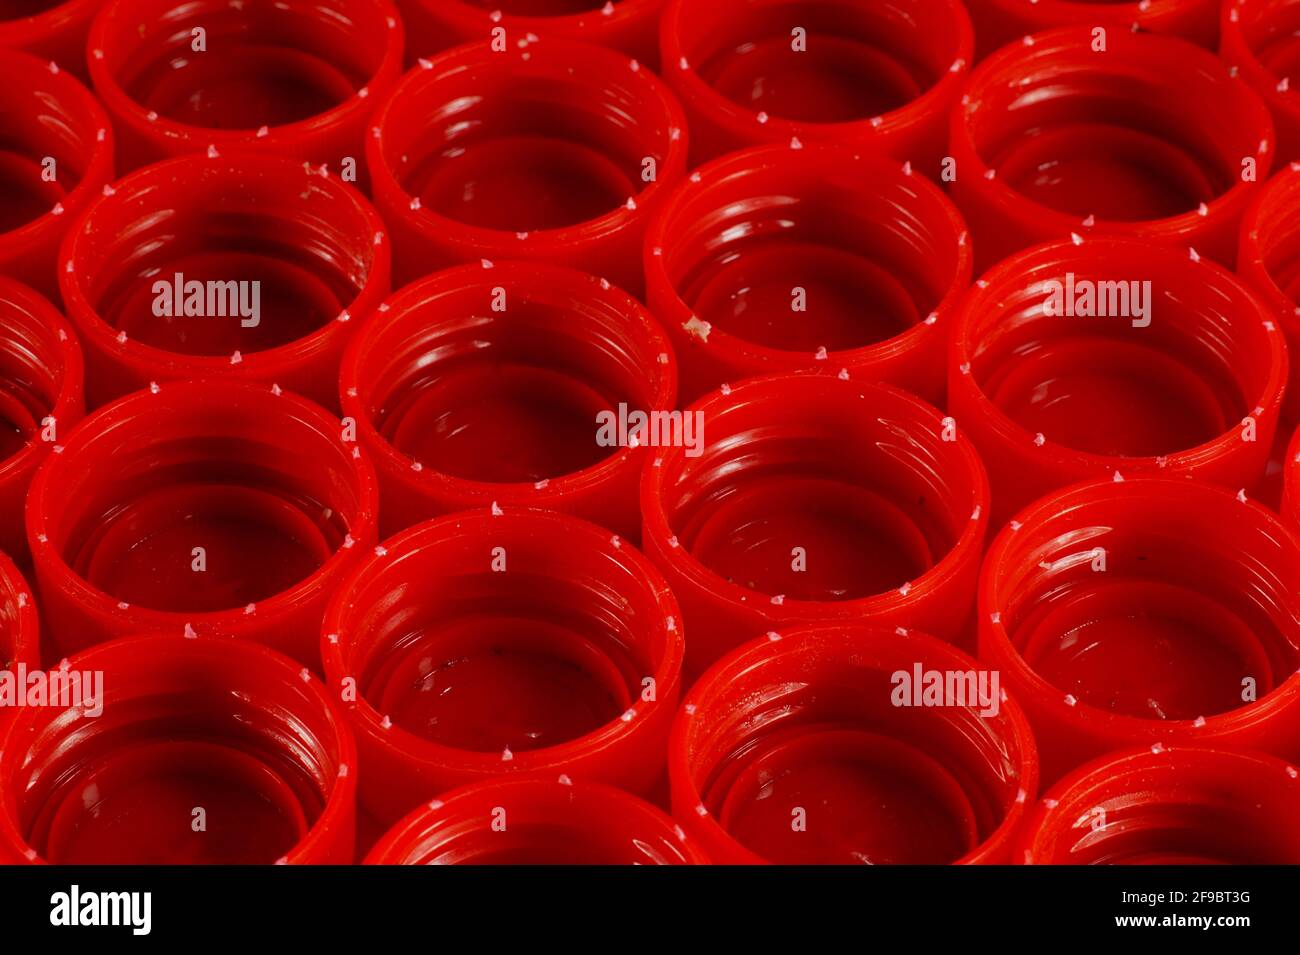 Red caps from bottles made of HDPE (high-density polyethylene) segregated according to colors prepared for recycling. Recyclable materials. Stock Photo